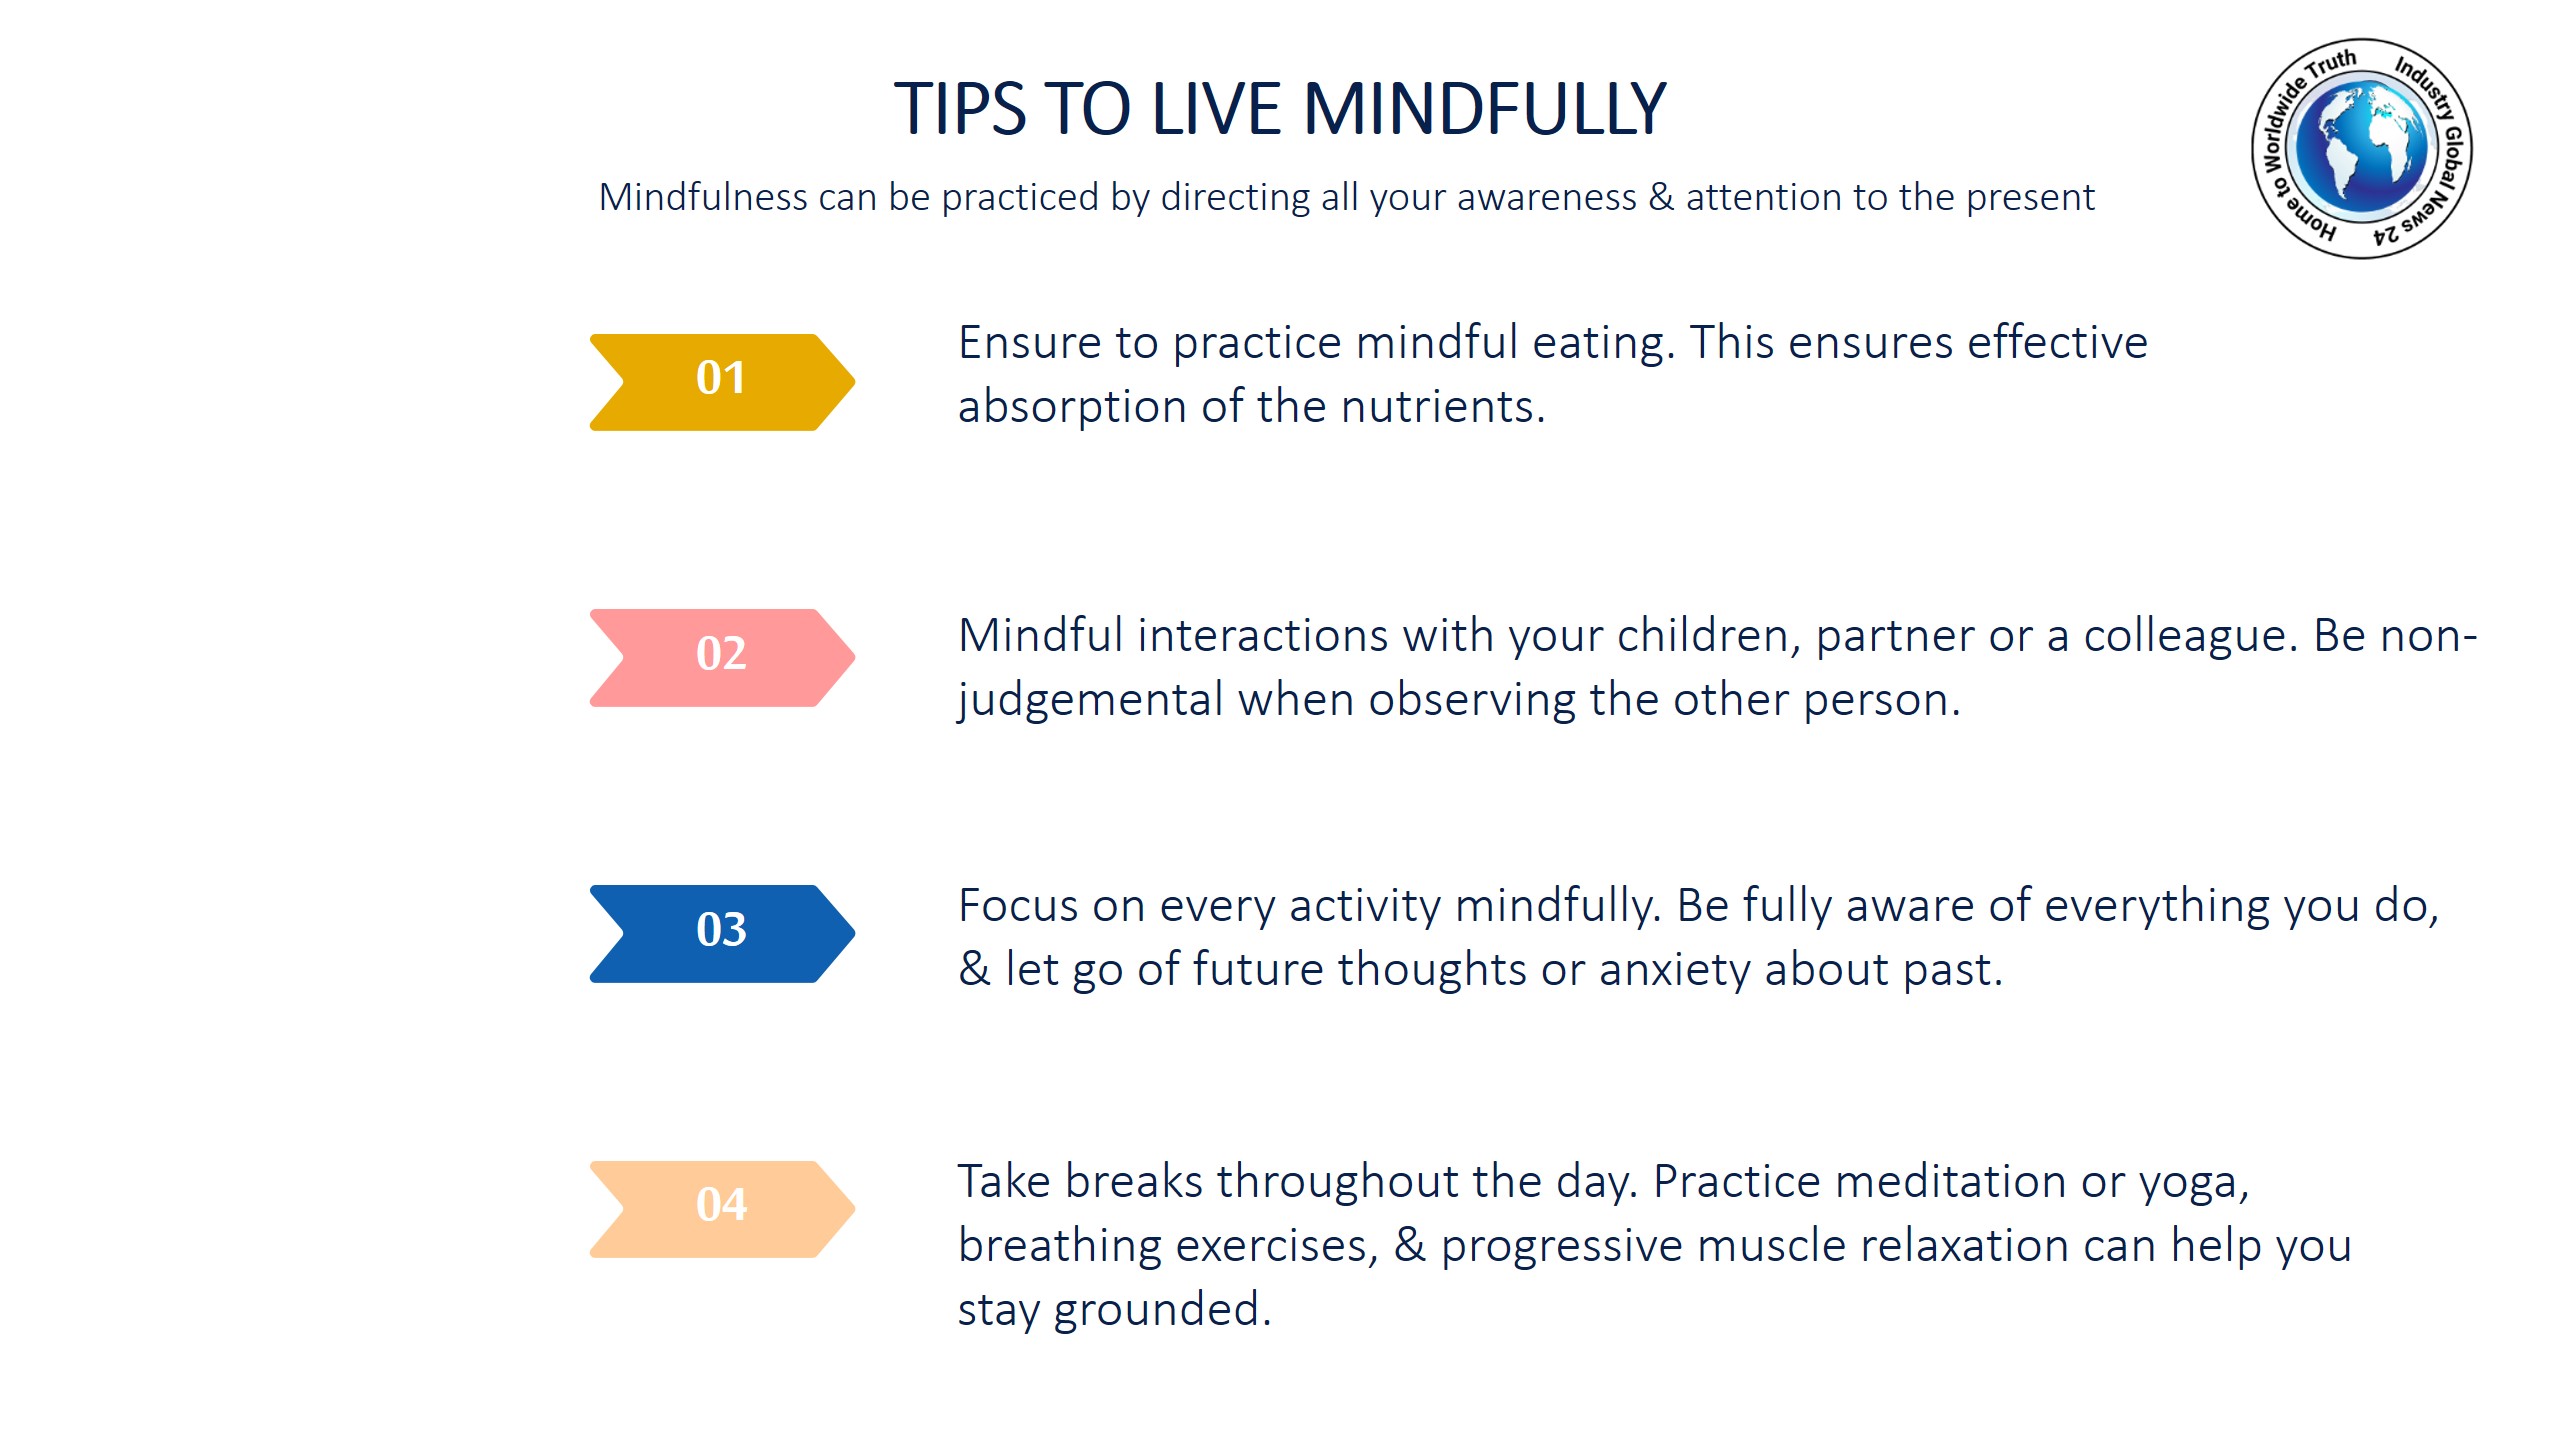 Tips to live mindfully